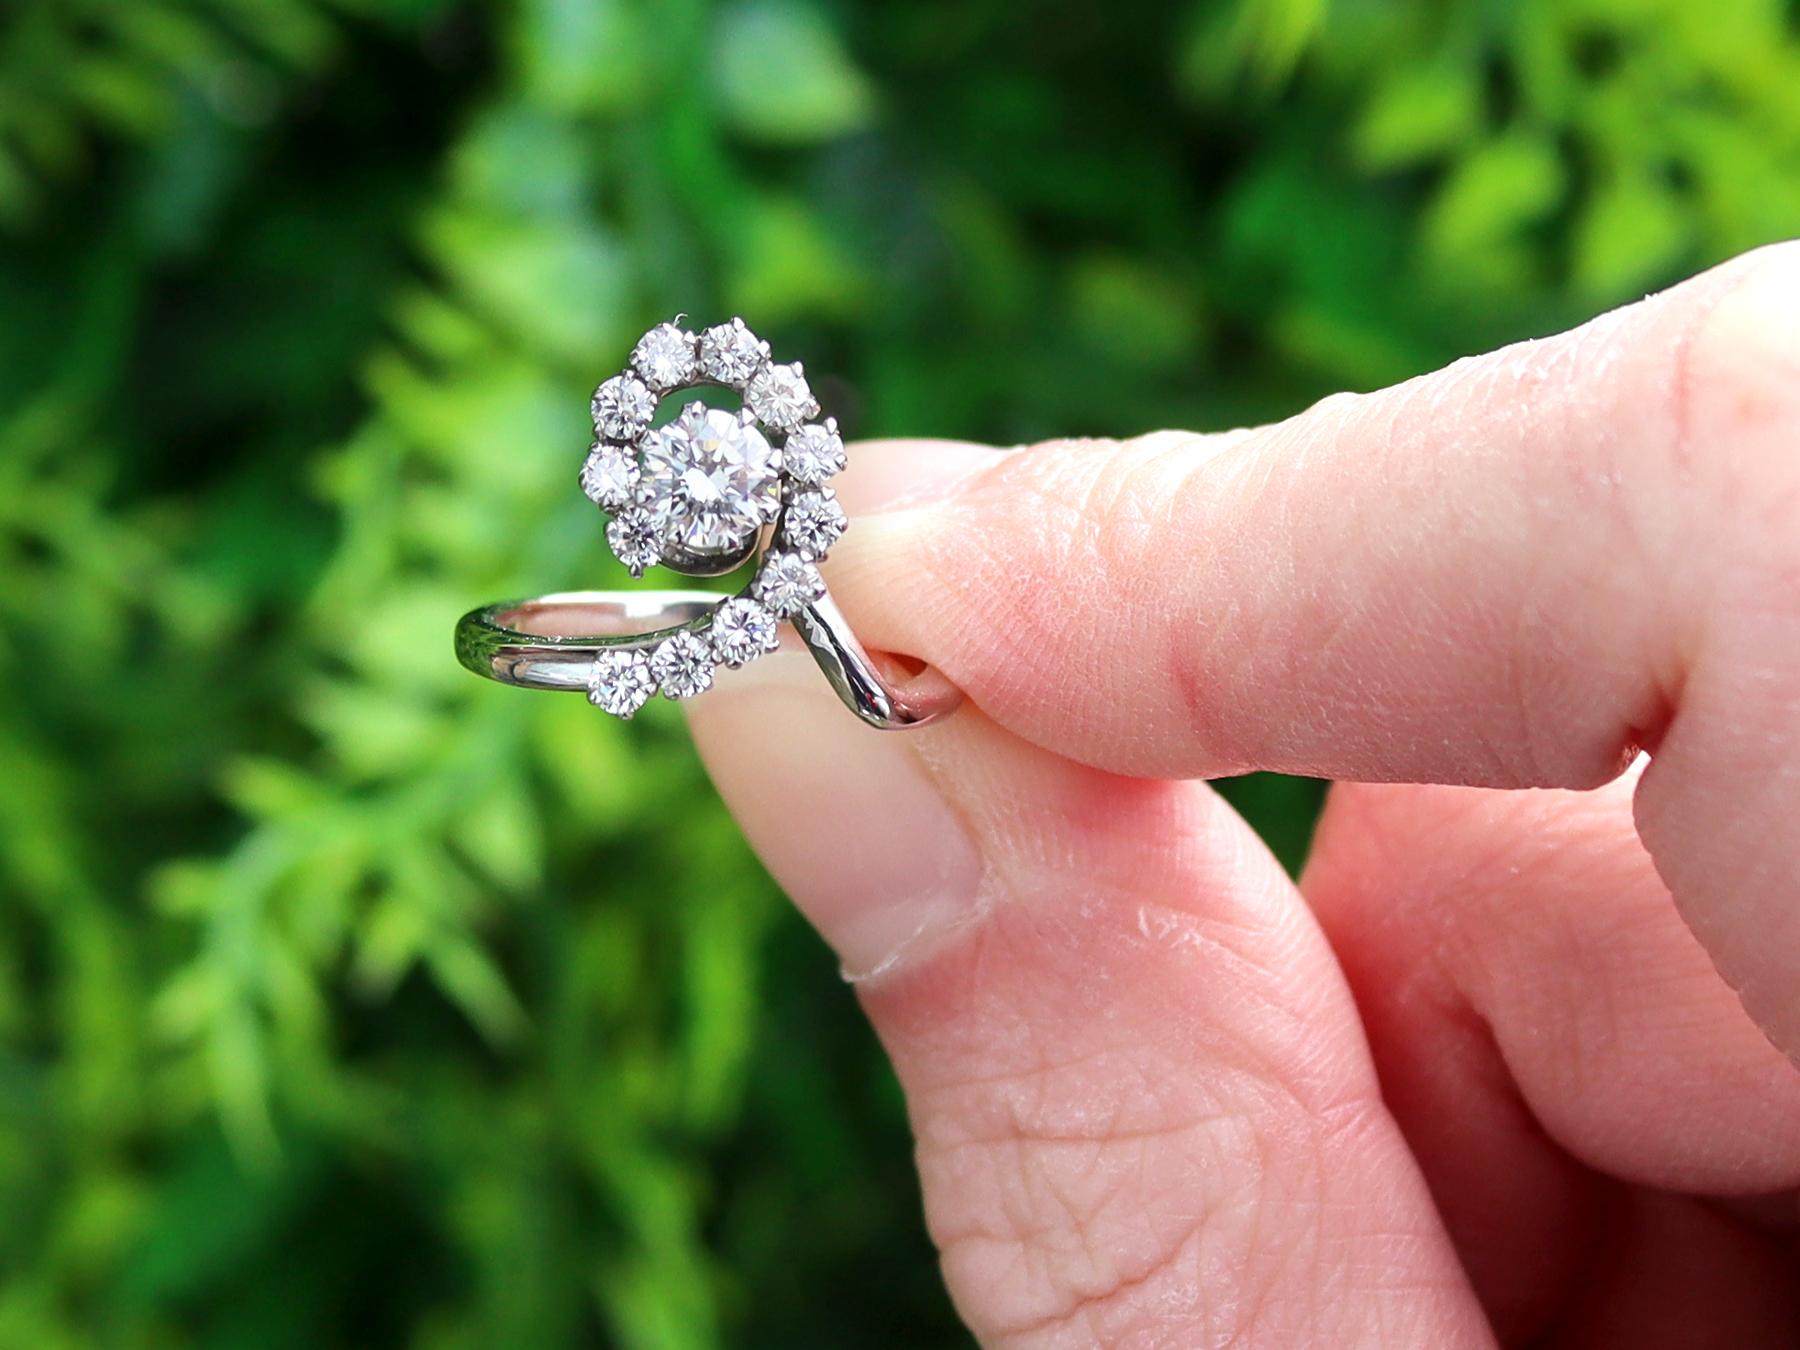 A fine and impressive vintage 0.97 carat diamond and 18 karat white gold cocktail ring; part of our diverse antique jewelry and estate jewelry collections.

This fine and impressive vintage 1940s diamond dress ring has been crafted in 18k white